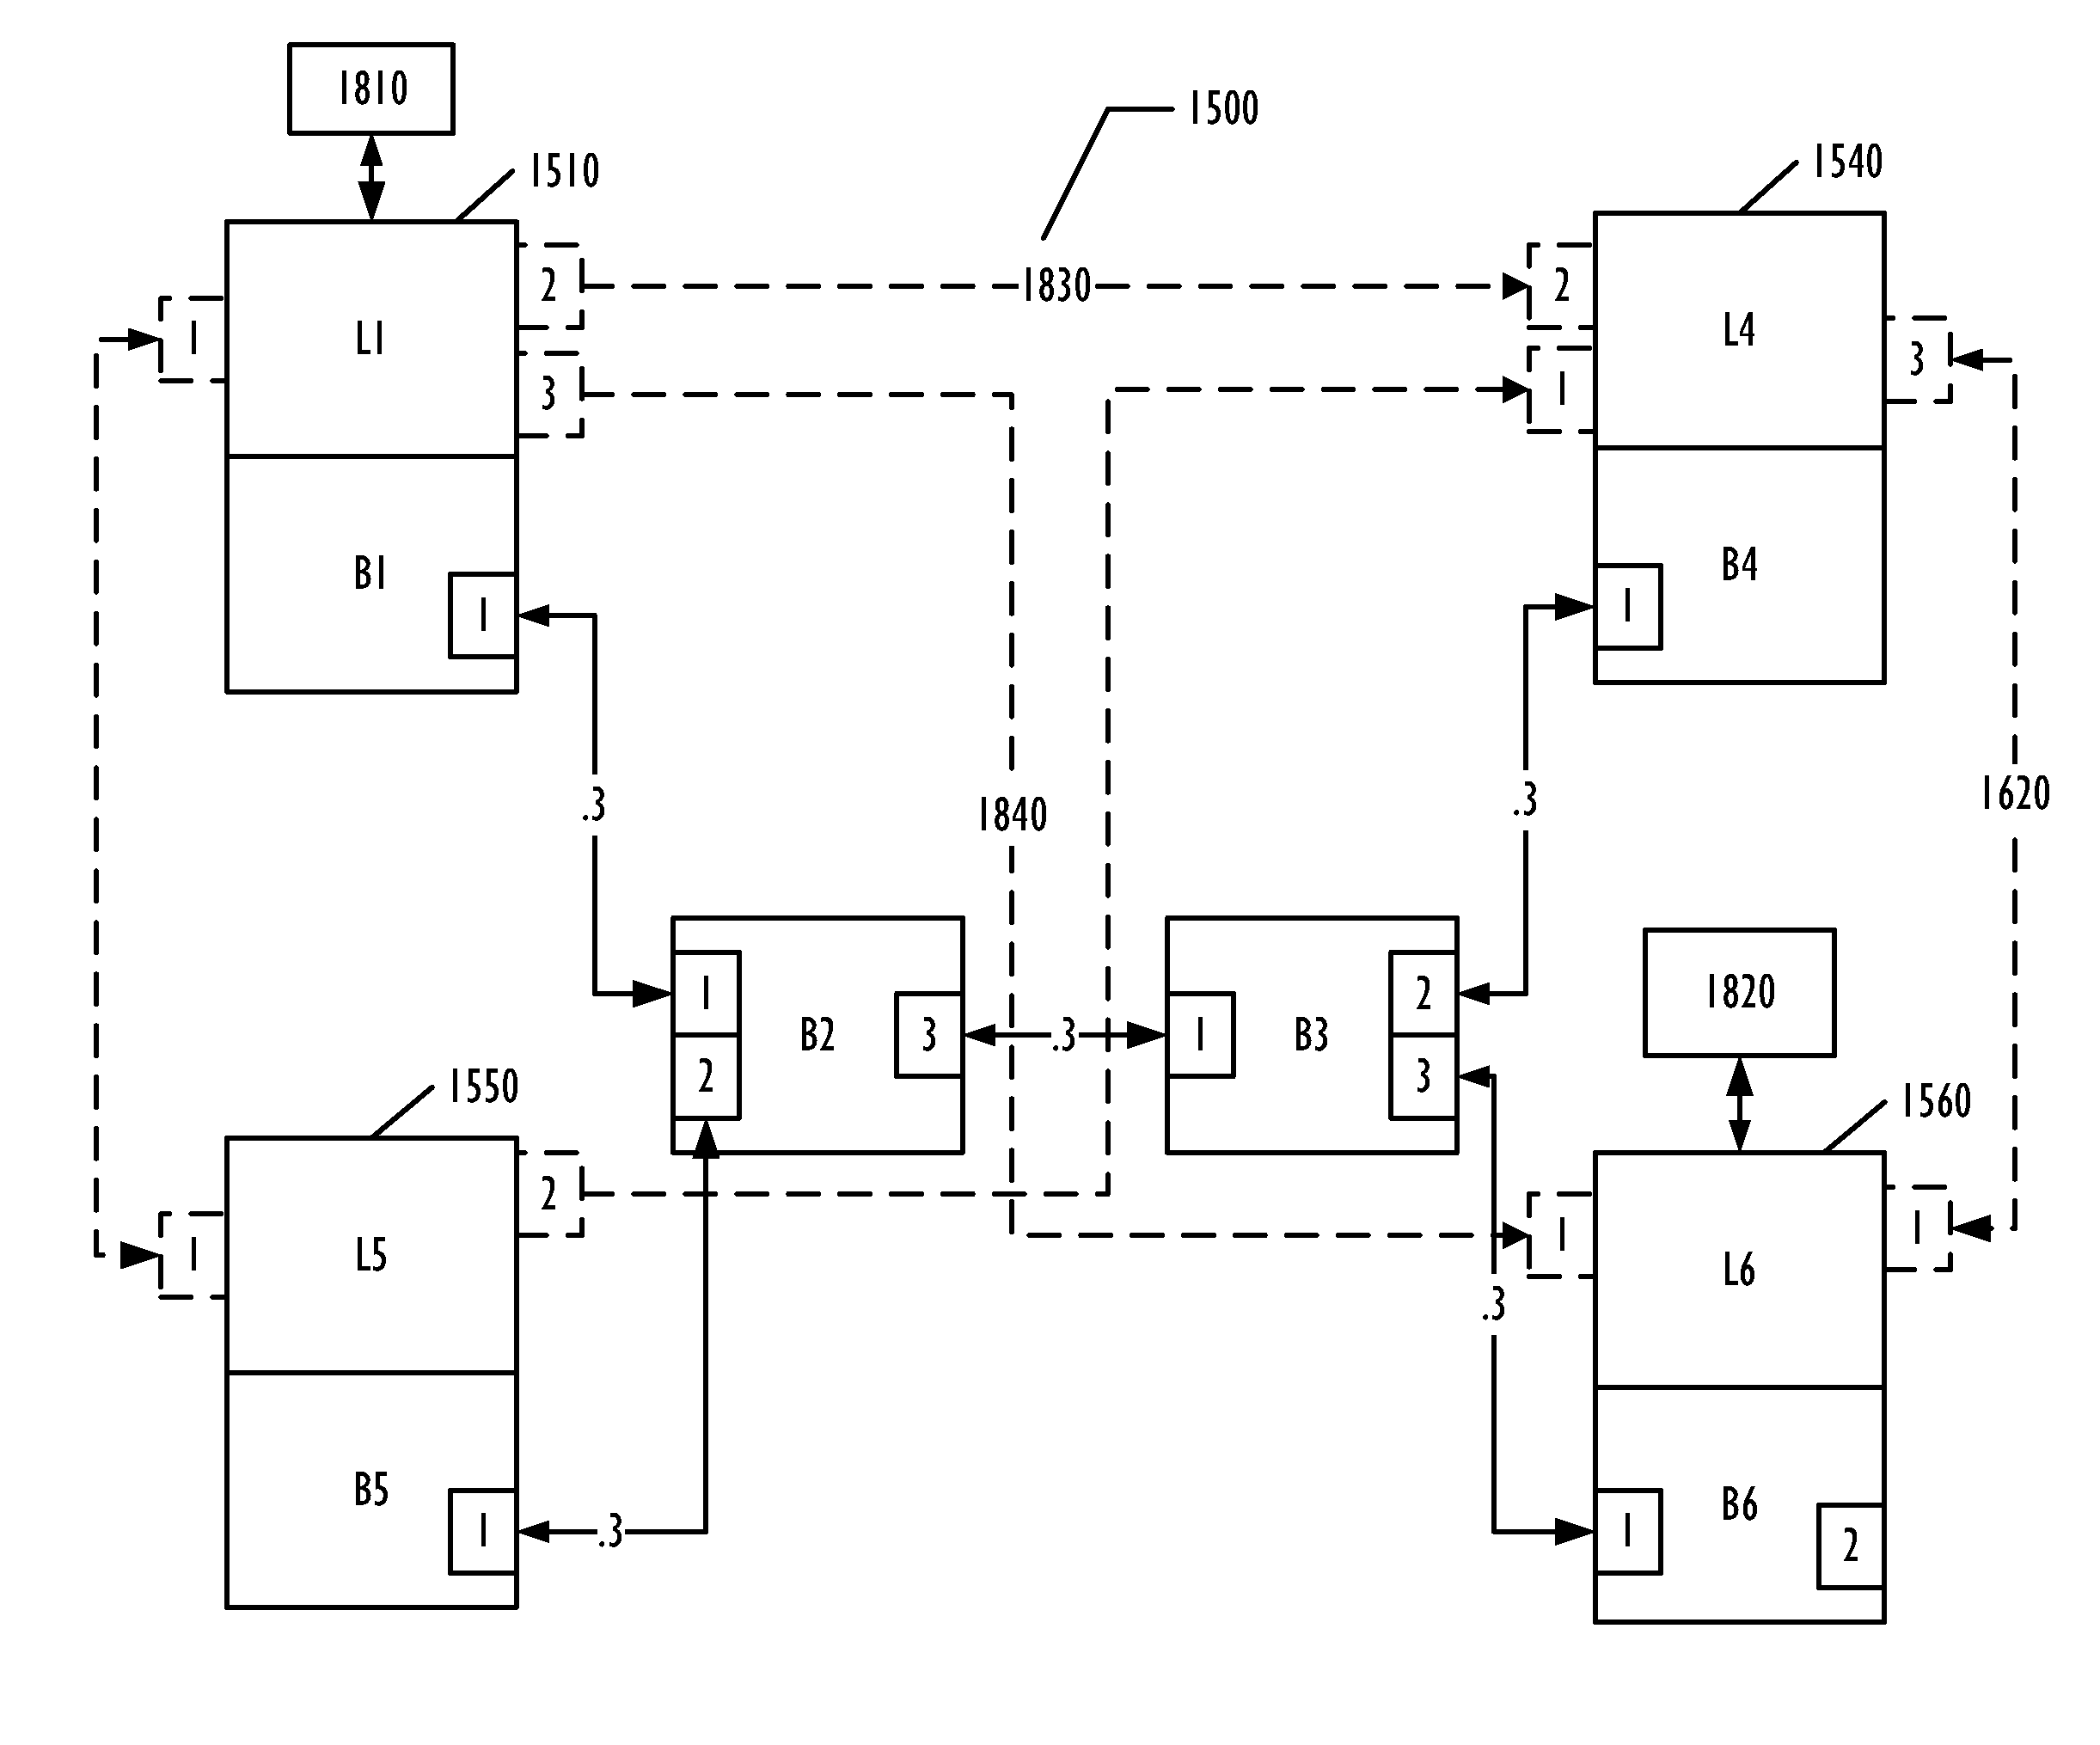 Defining an optimal topology for a group of logical switches